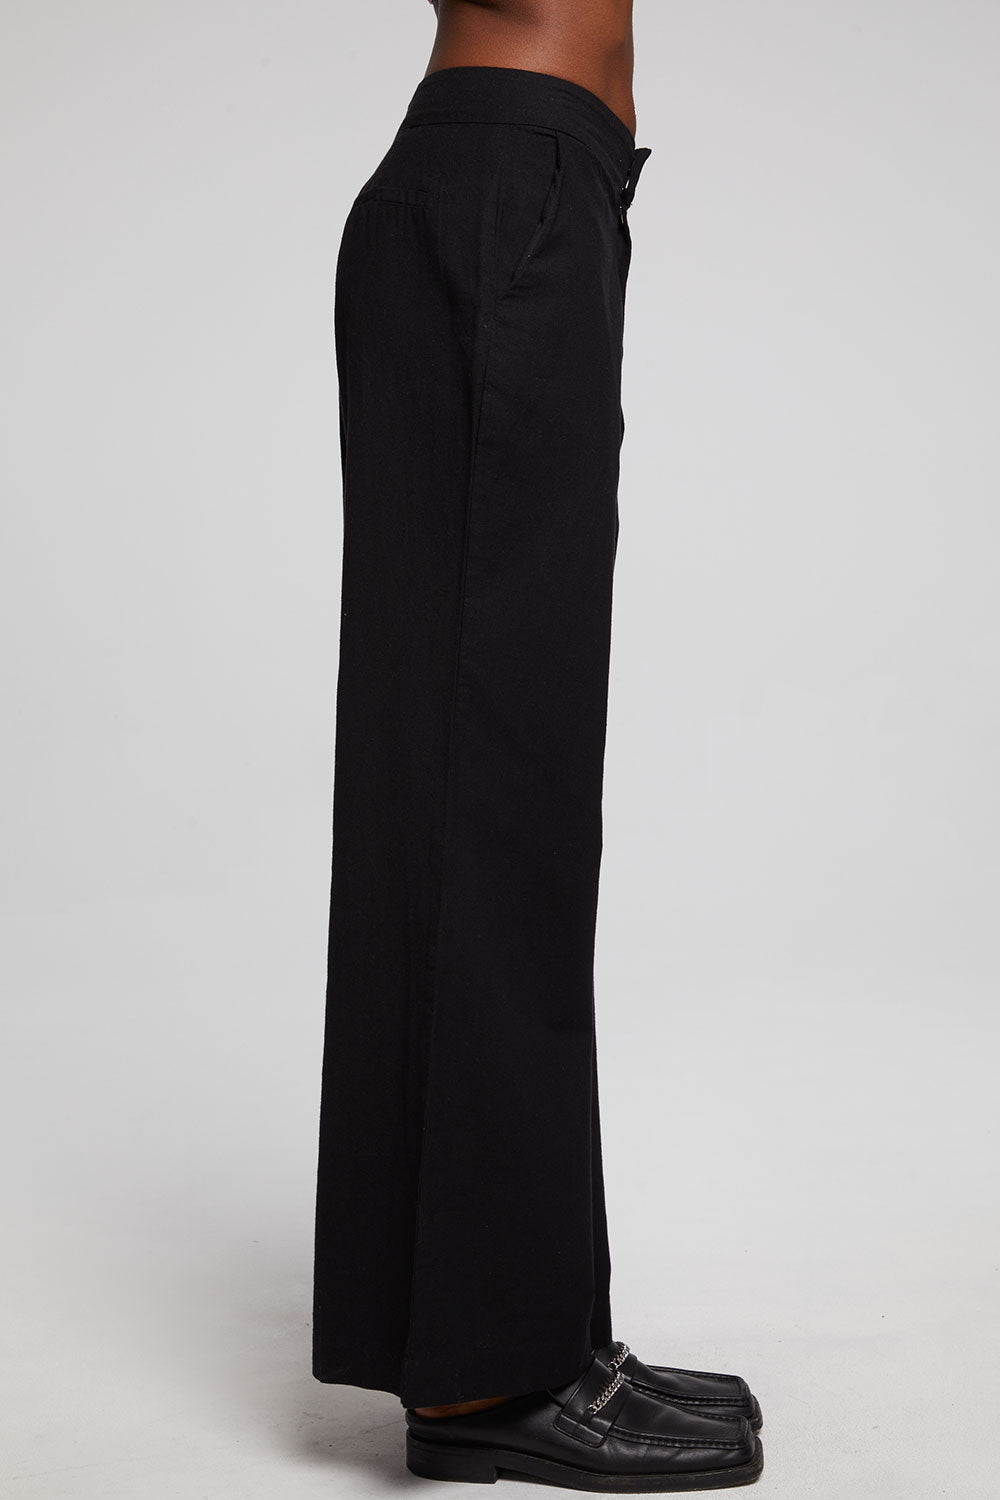 Simone Trousers - Black Onyx WOMENS chaserbrand